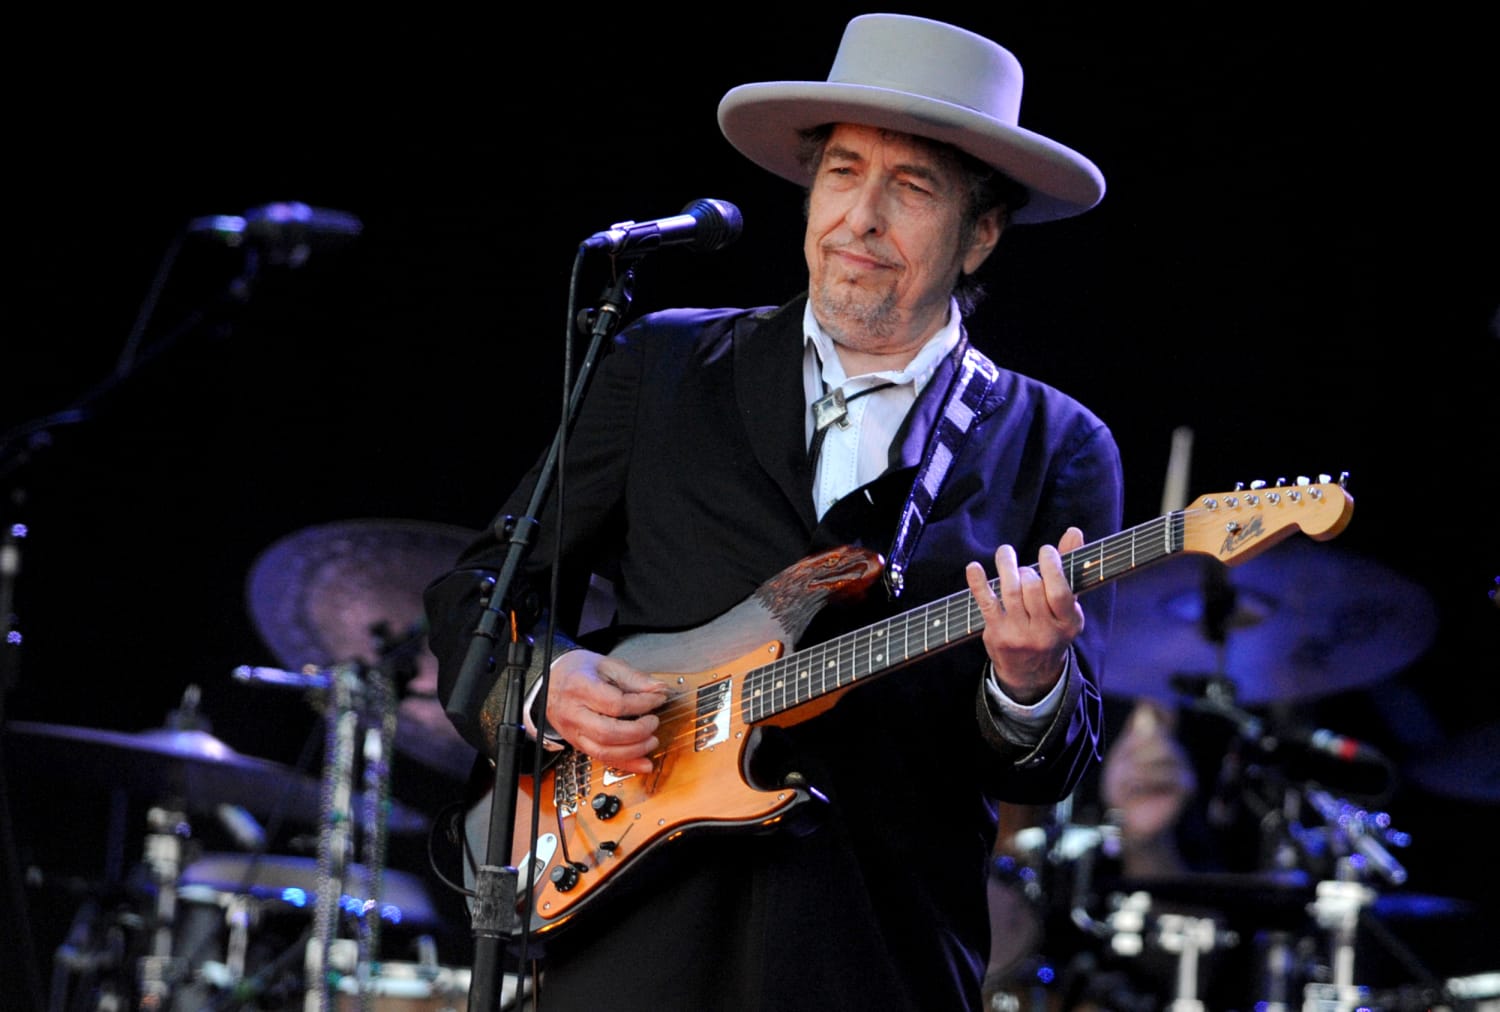 Bob Dylan sells his entire catalog of recorded music to Sony